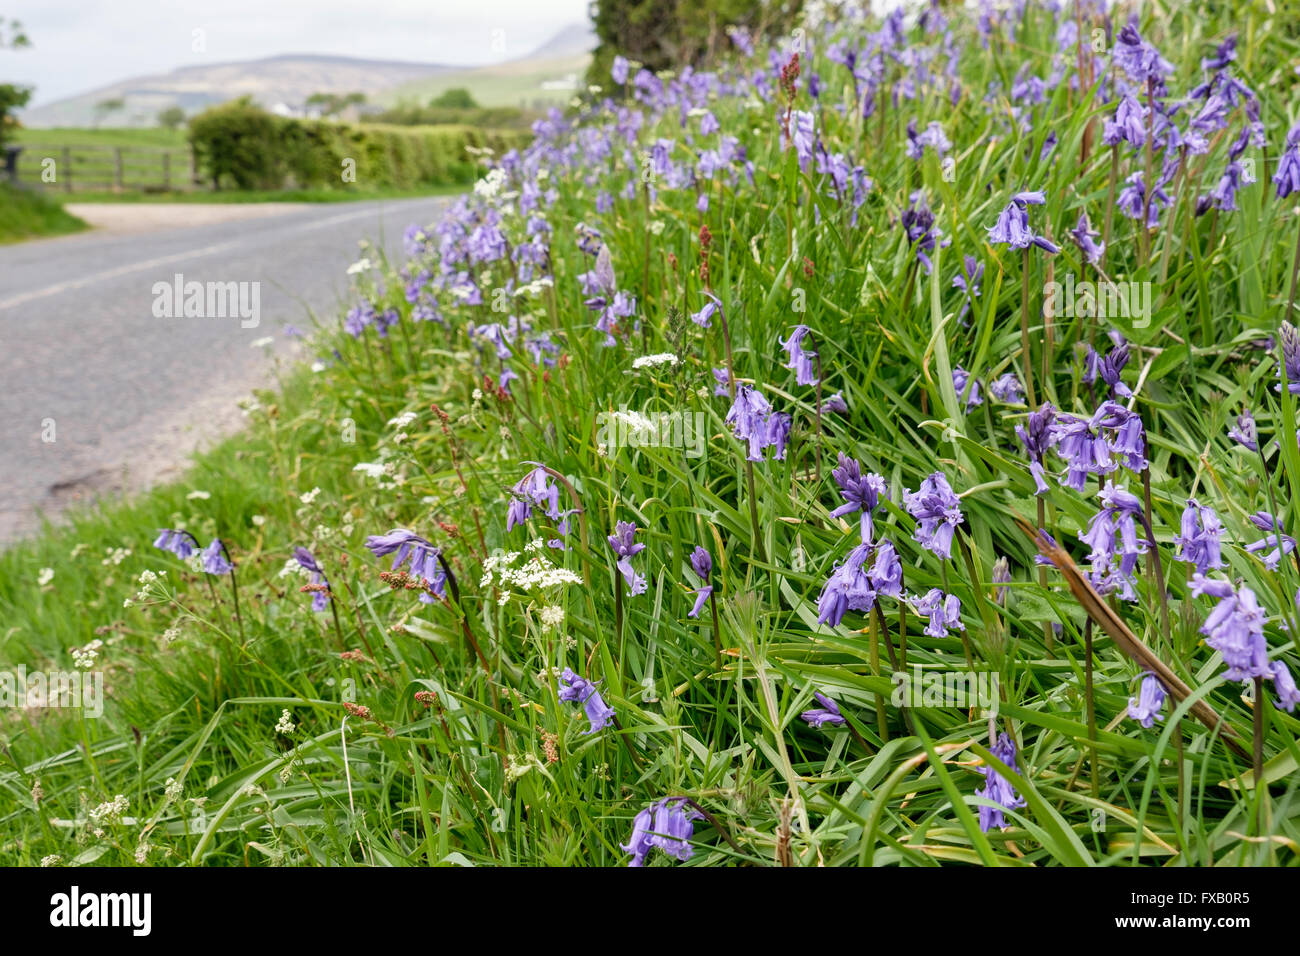 Roadside grass verge with flowering Bluebells growing beside a country road in May. Isle of Arran Hebrides Scotland UK Britain Stock Photo